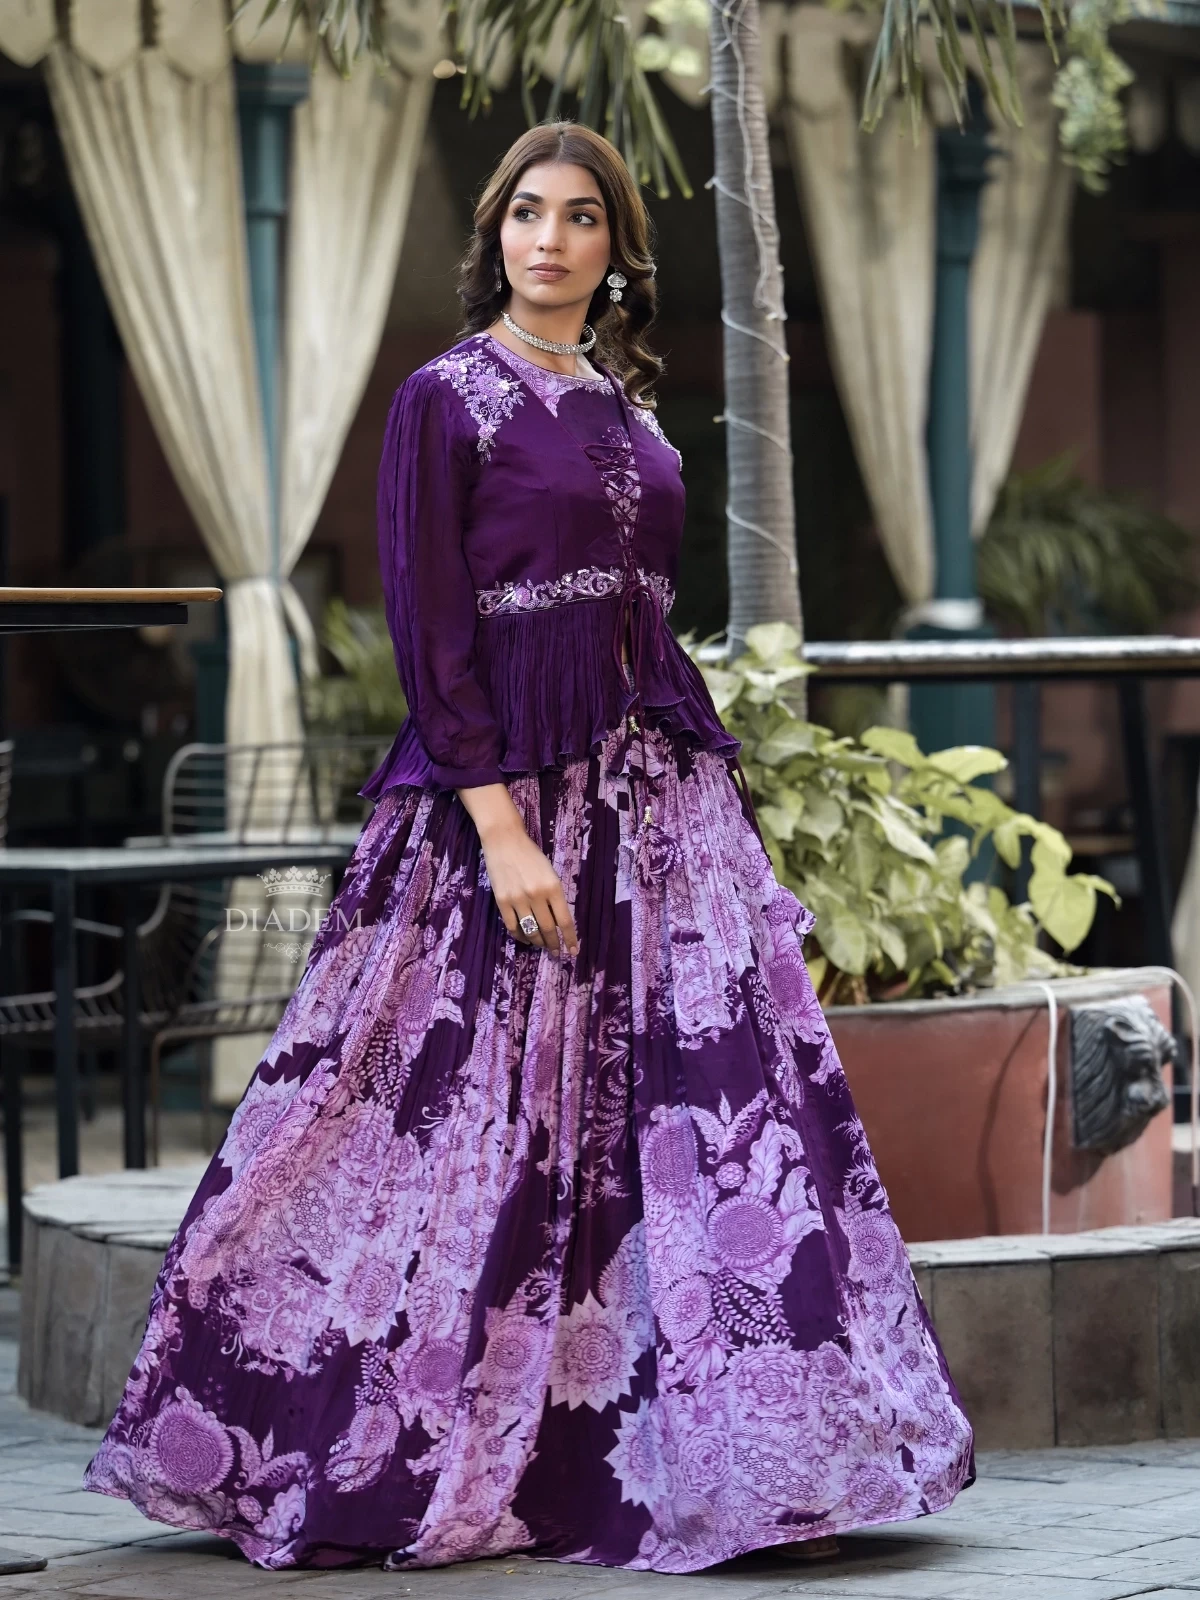 Purple Georgette Indo-western Lehenga Embellished With Floral Prints And Sequins, Paired With Overcoat